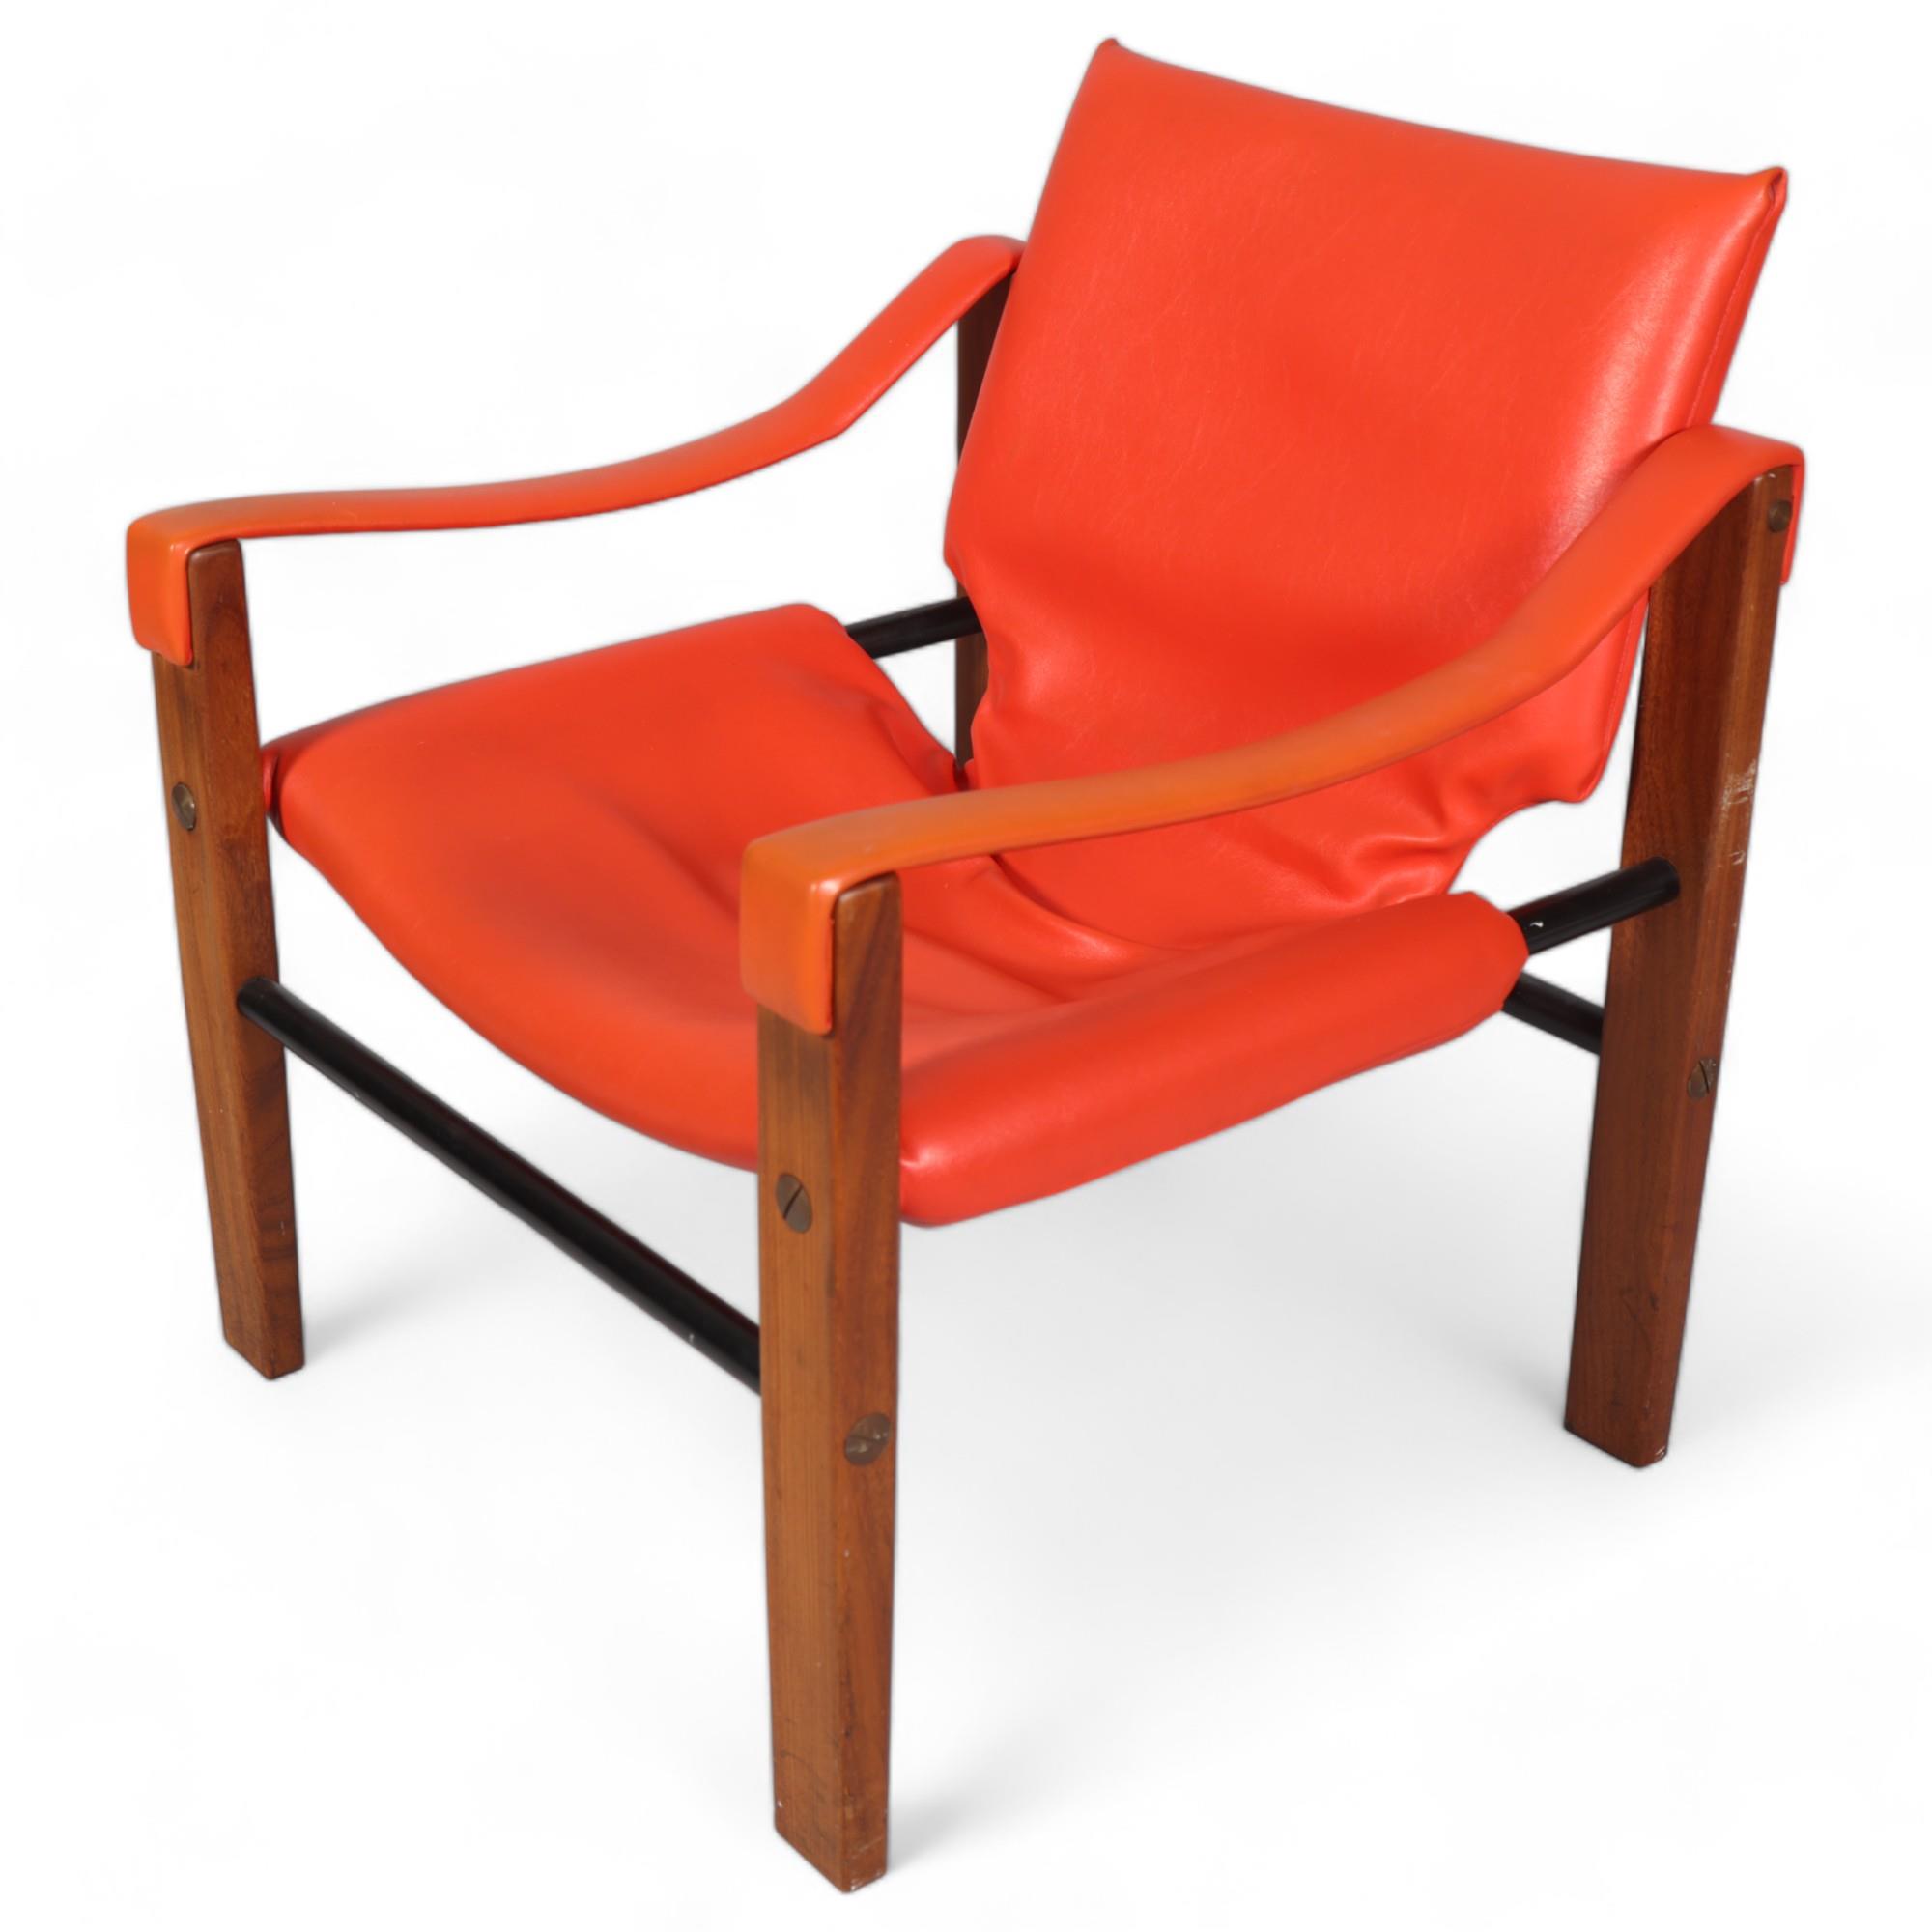 MAURICE BURKE for Arkana, a mid 20th century safari chair, red faux leather upholstery with hardwood